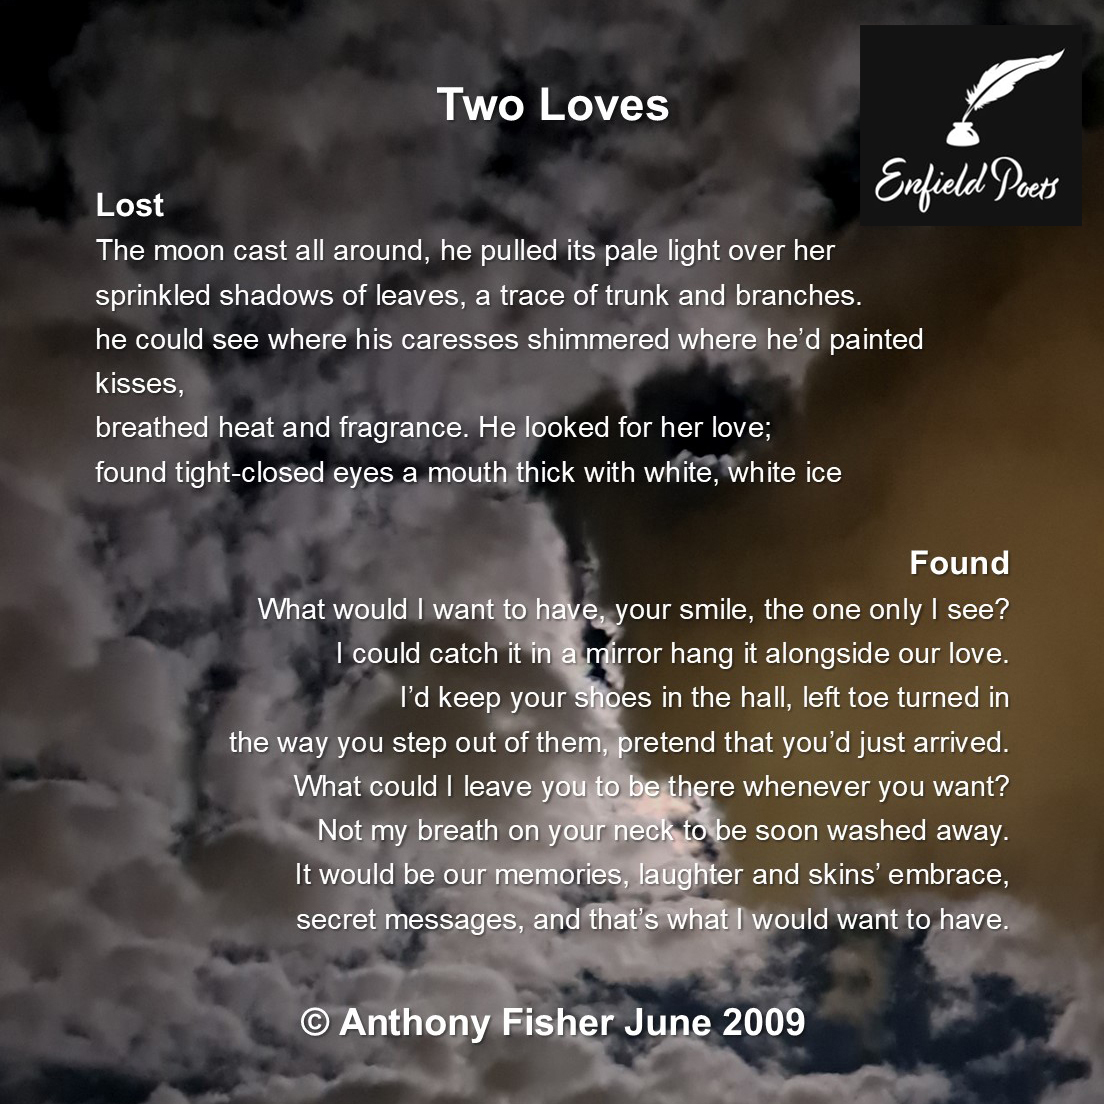 Today is #WorldPoetryDay, & to mark the occasion, we will be posting a few #poems written by the Poets in residence at #FortyHall – The #EnfieldPoets. @enfieldpoets #WorldPoetryDay2024 #PoetryDay #PoetryDay2024 #Poetry #poetrycommunity #writerscommunity #Enfield #NorthLondon